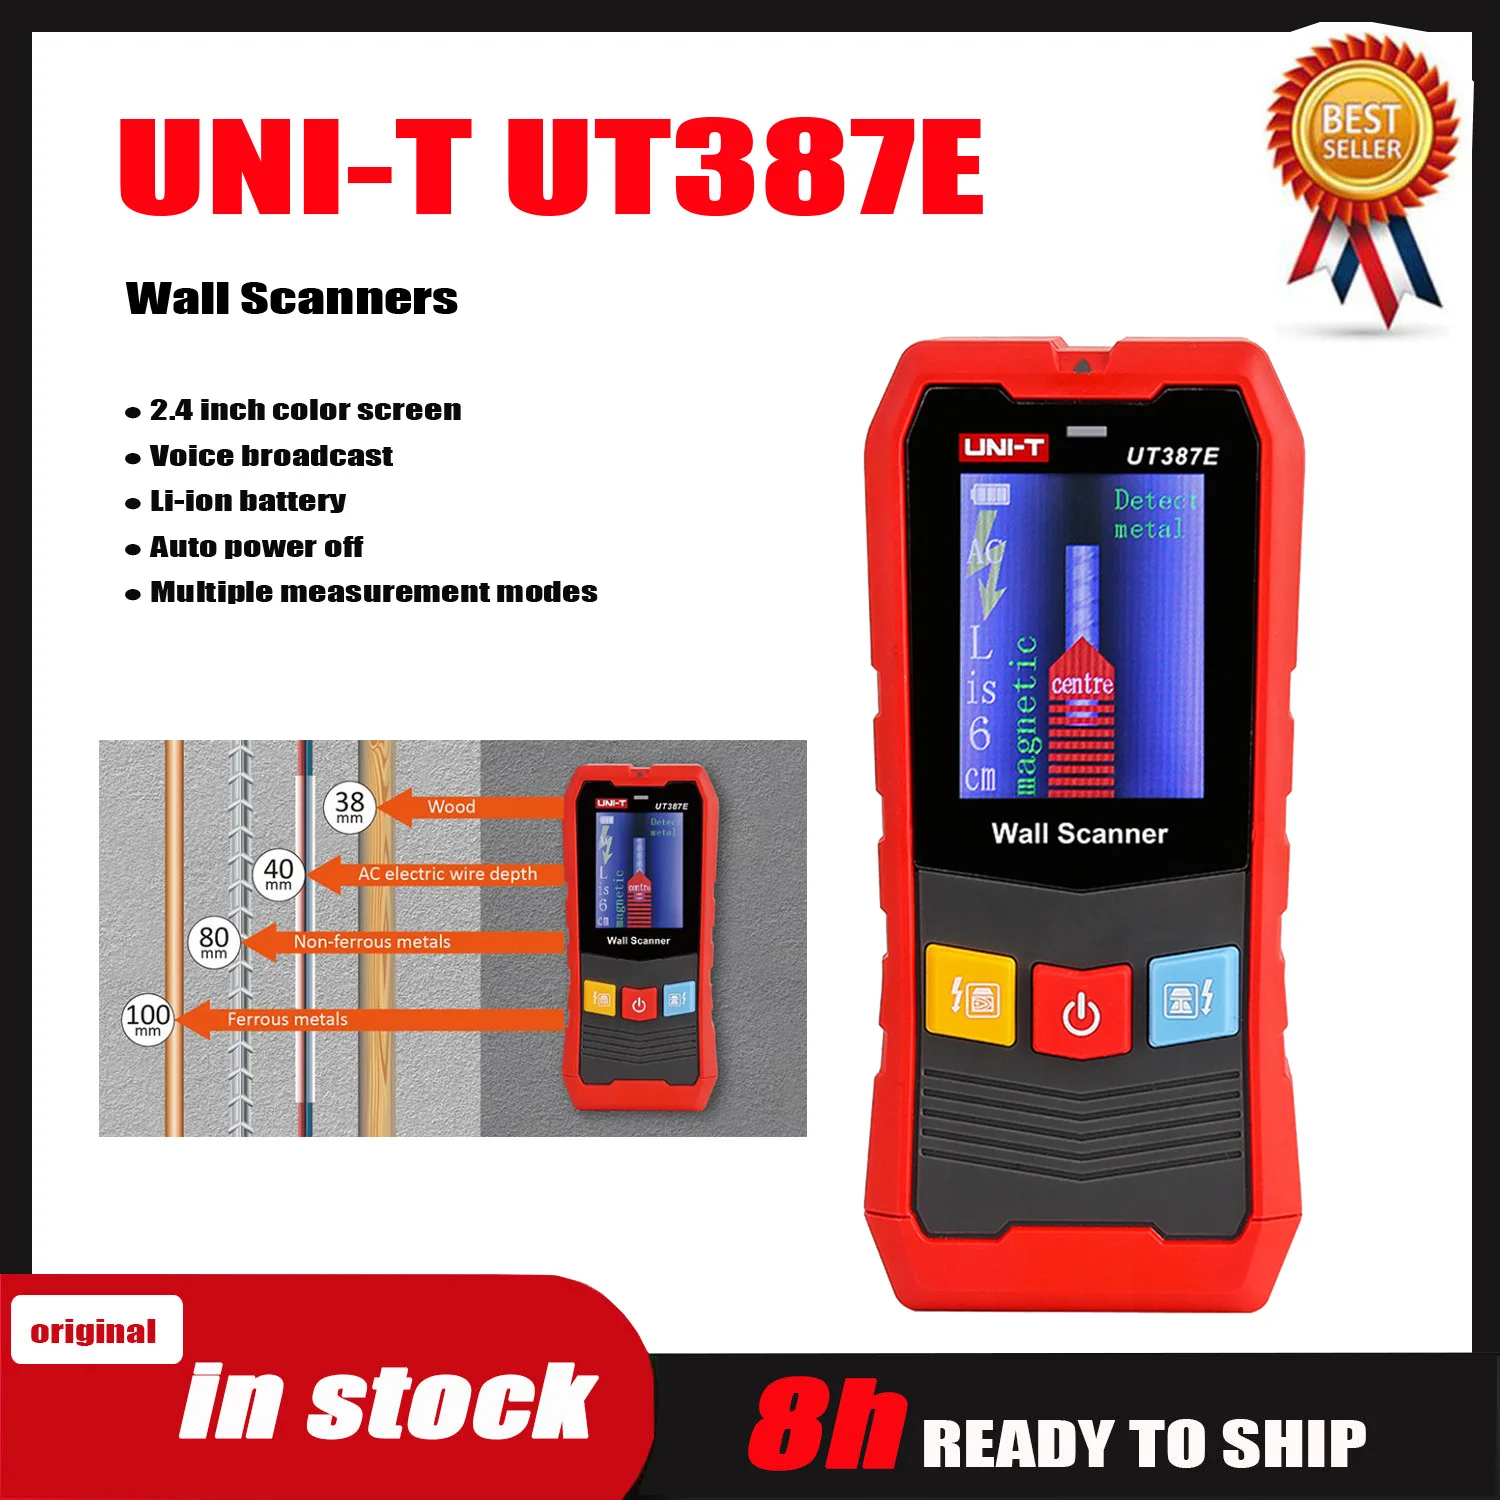 

UNI-T UT387E UT387LM UT387S Wall Scanners 4 In 1 Metal Detector Wood Stud Finder AC Voltage Live Cable Wires Depth Tracker.